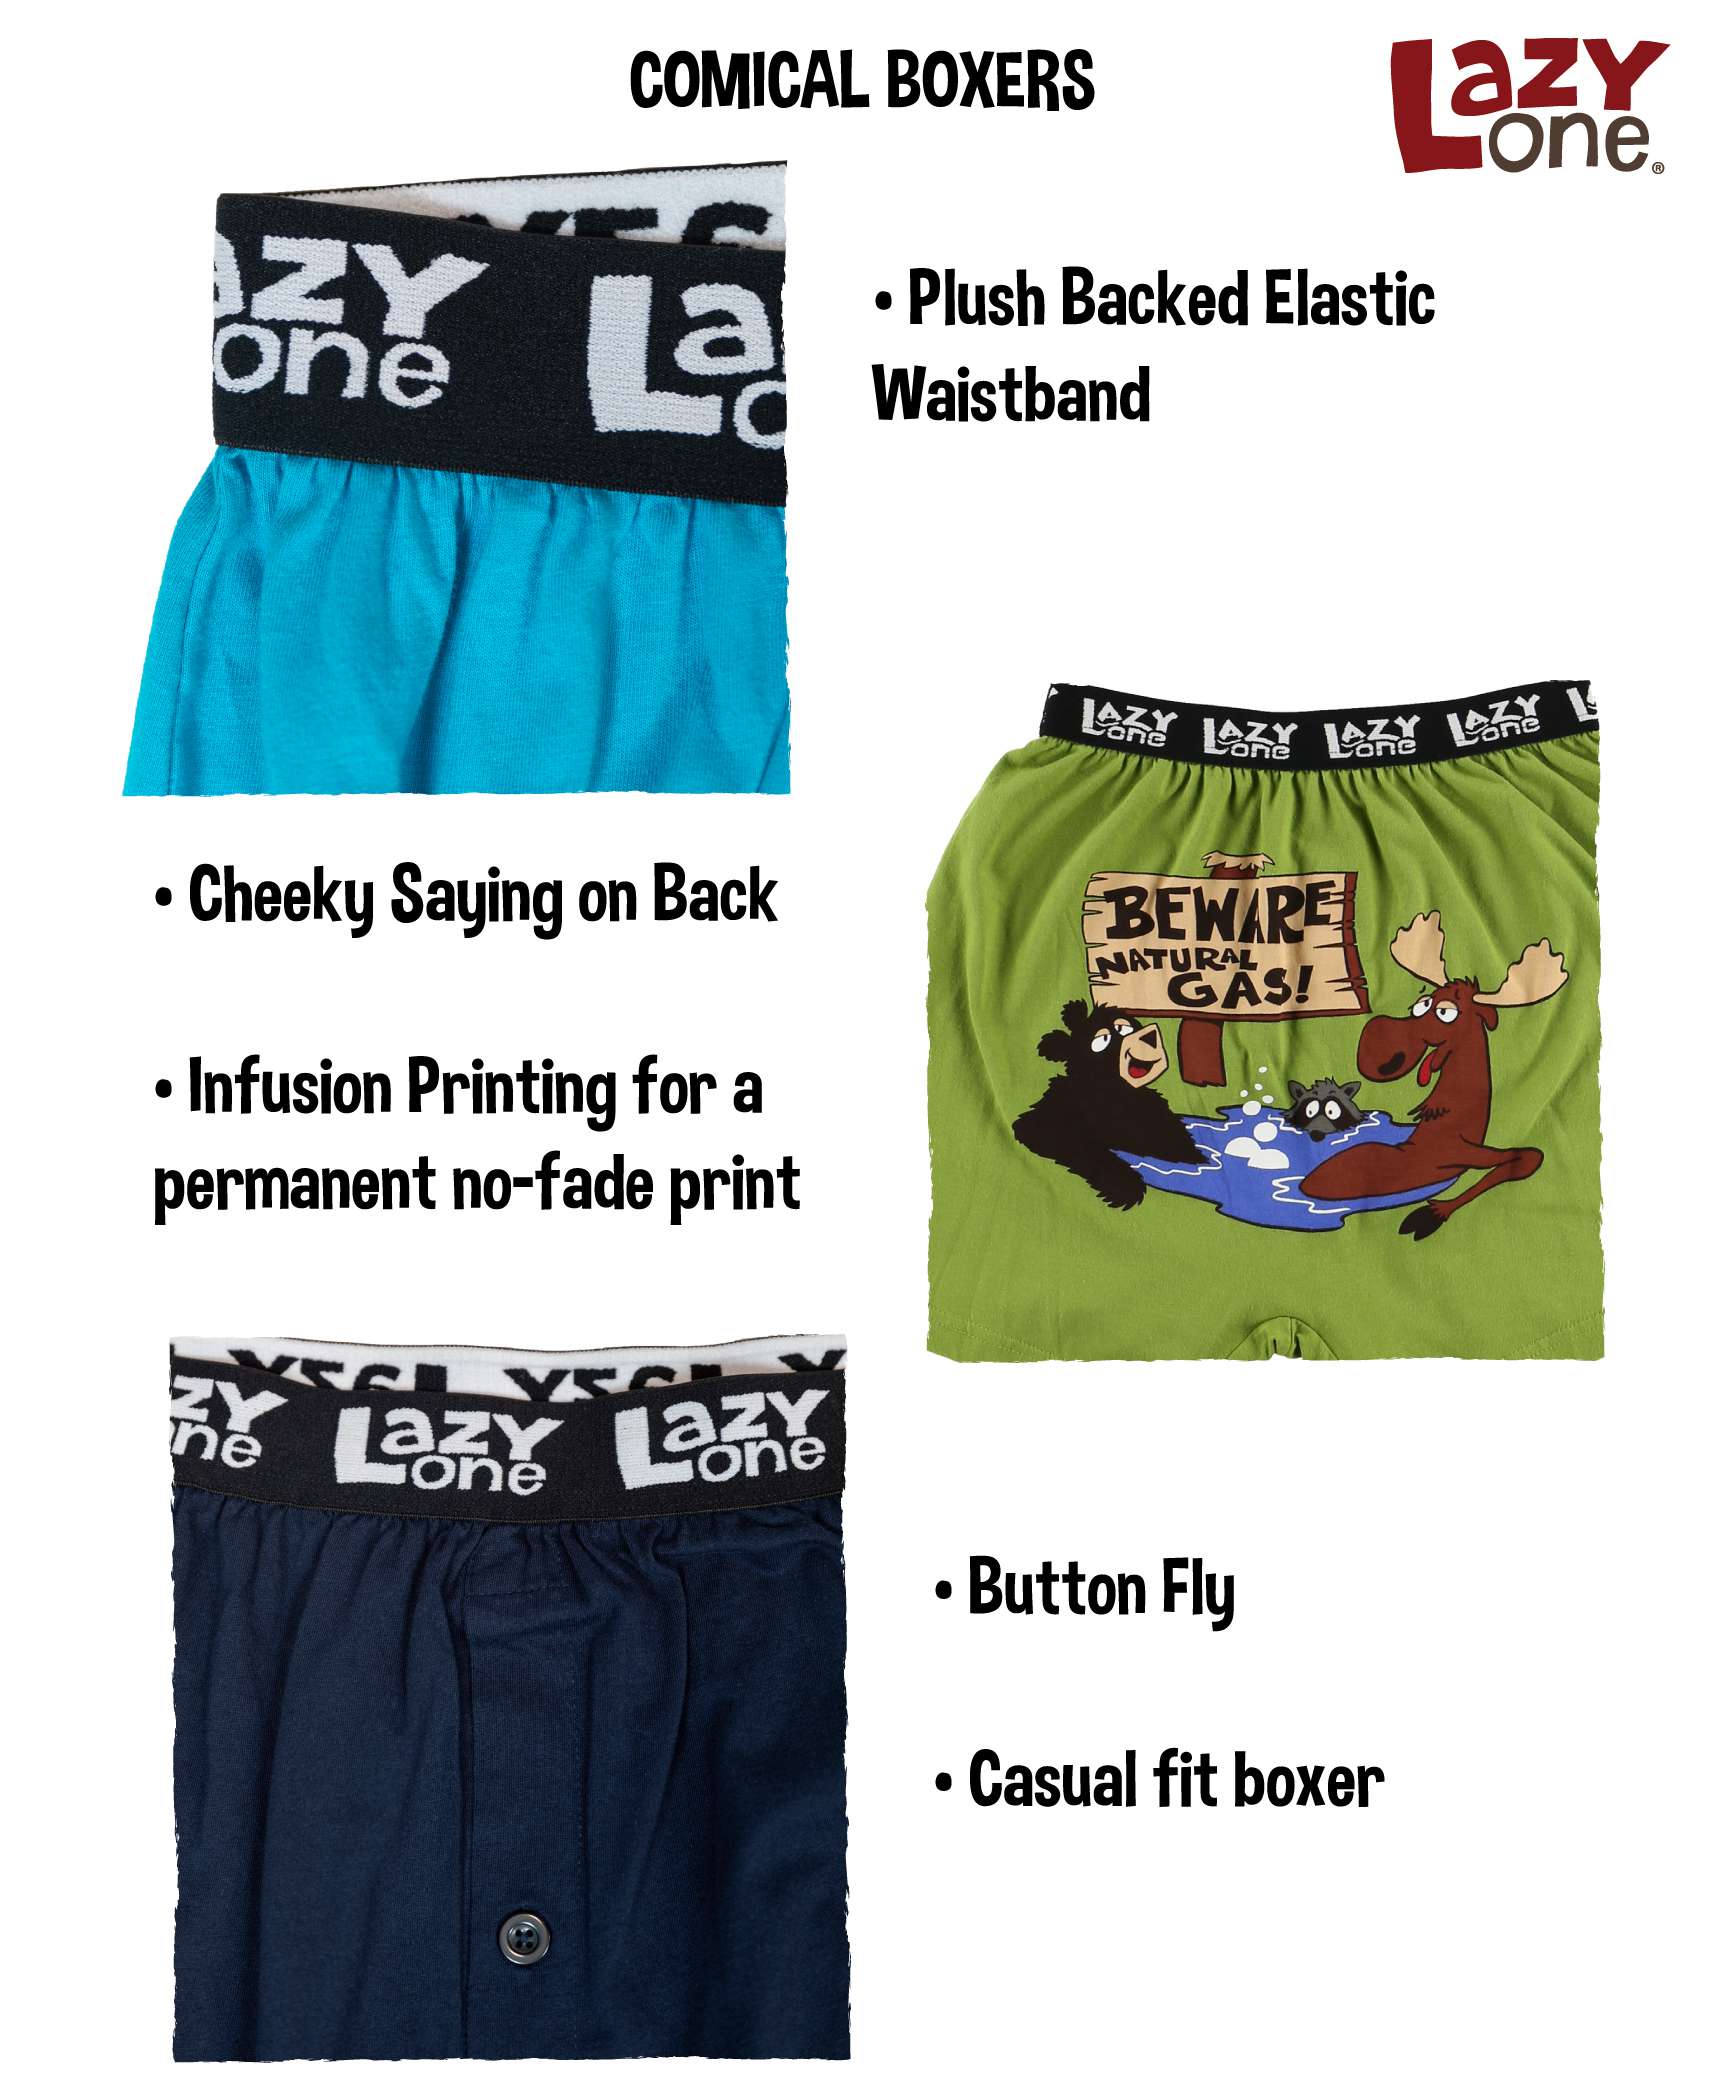 Do These Shorts Make My Bass Look Big? Men's Funny Boxer – Mermaid